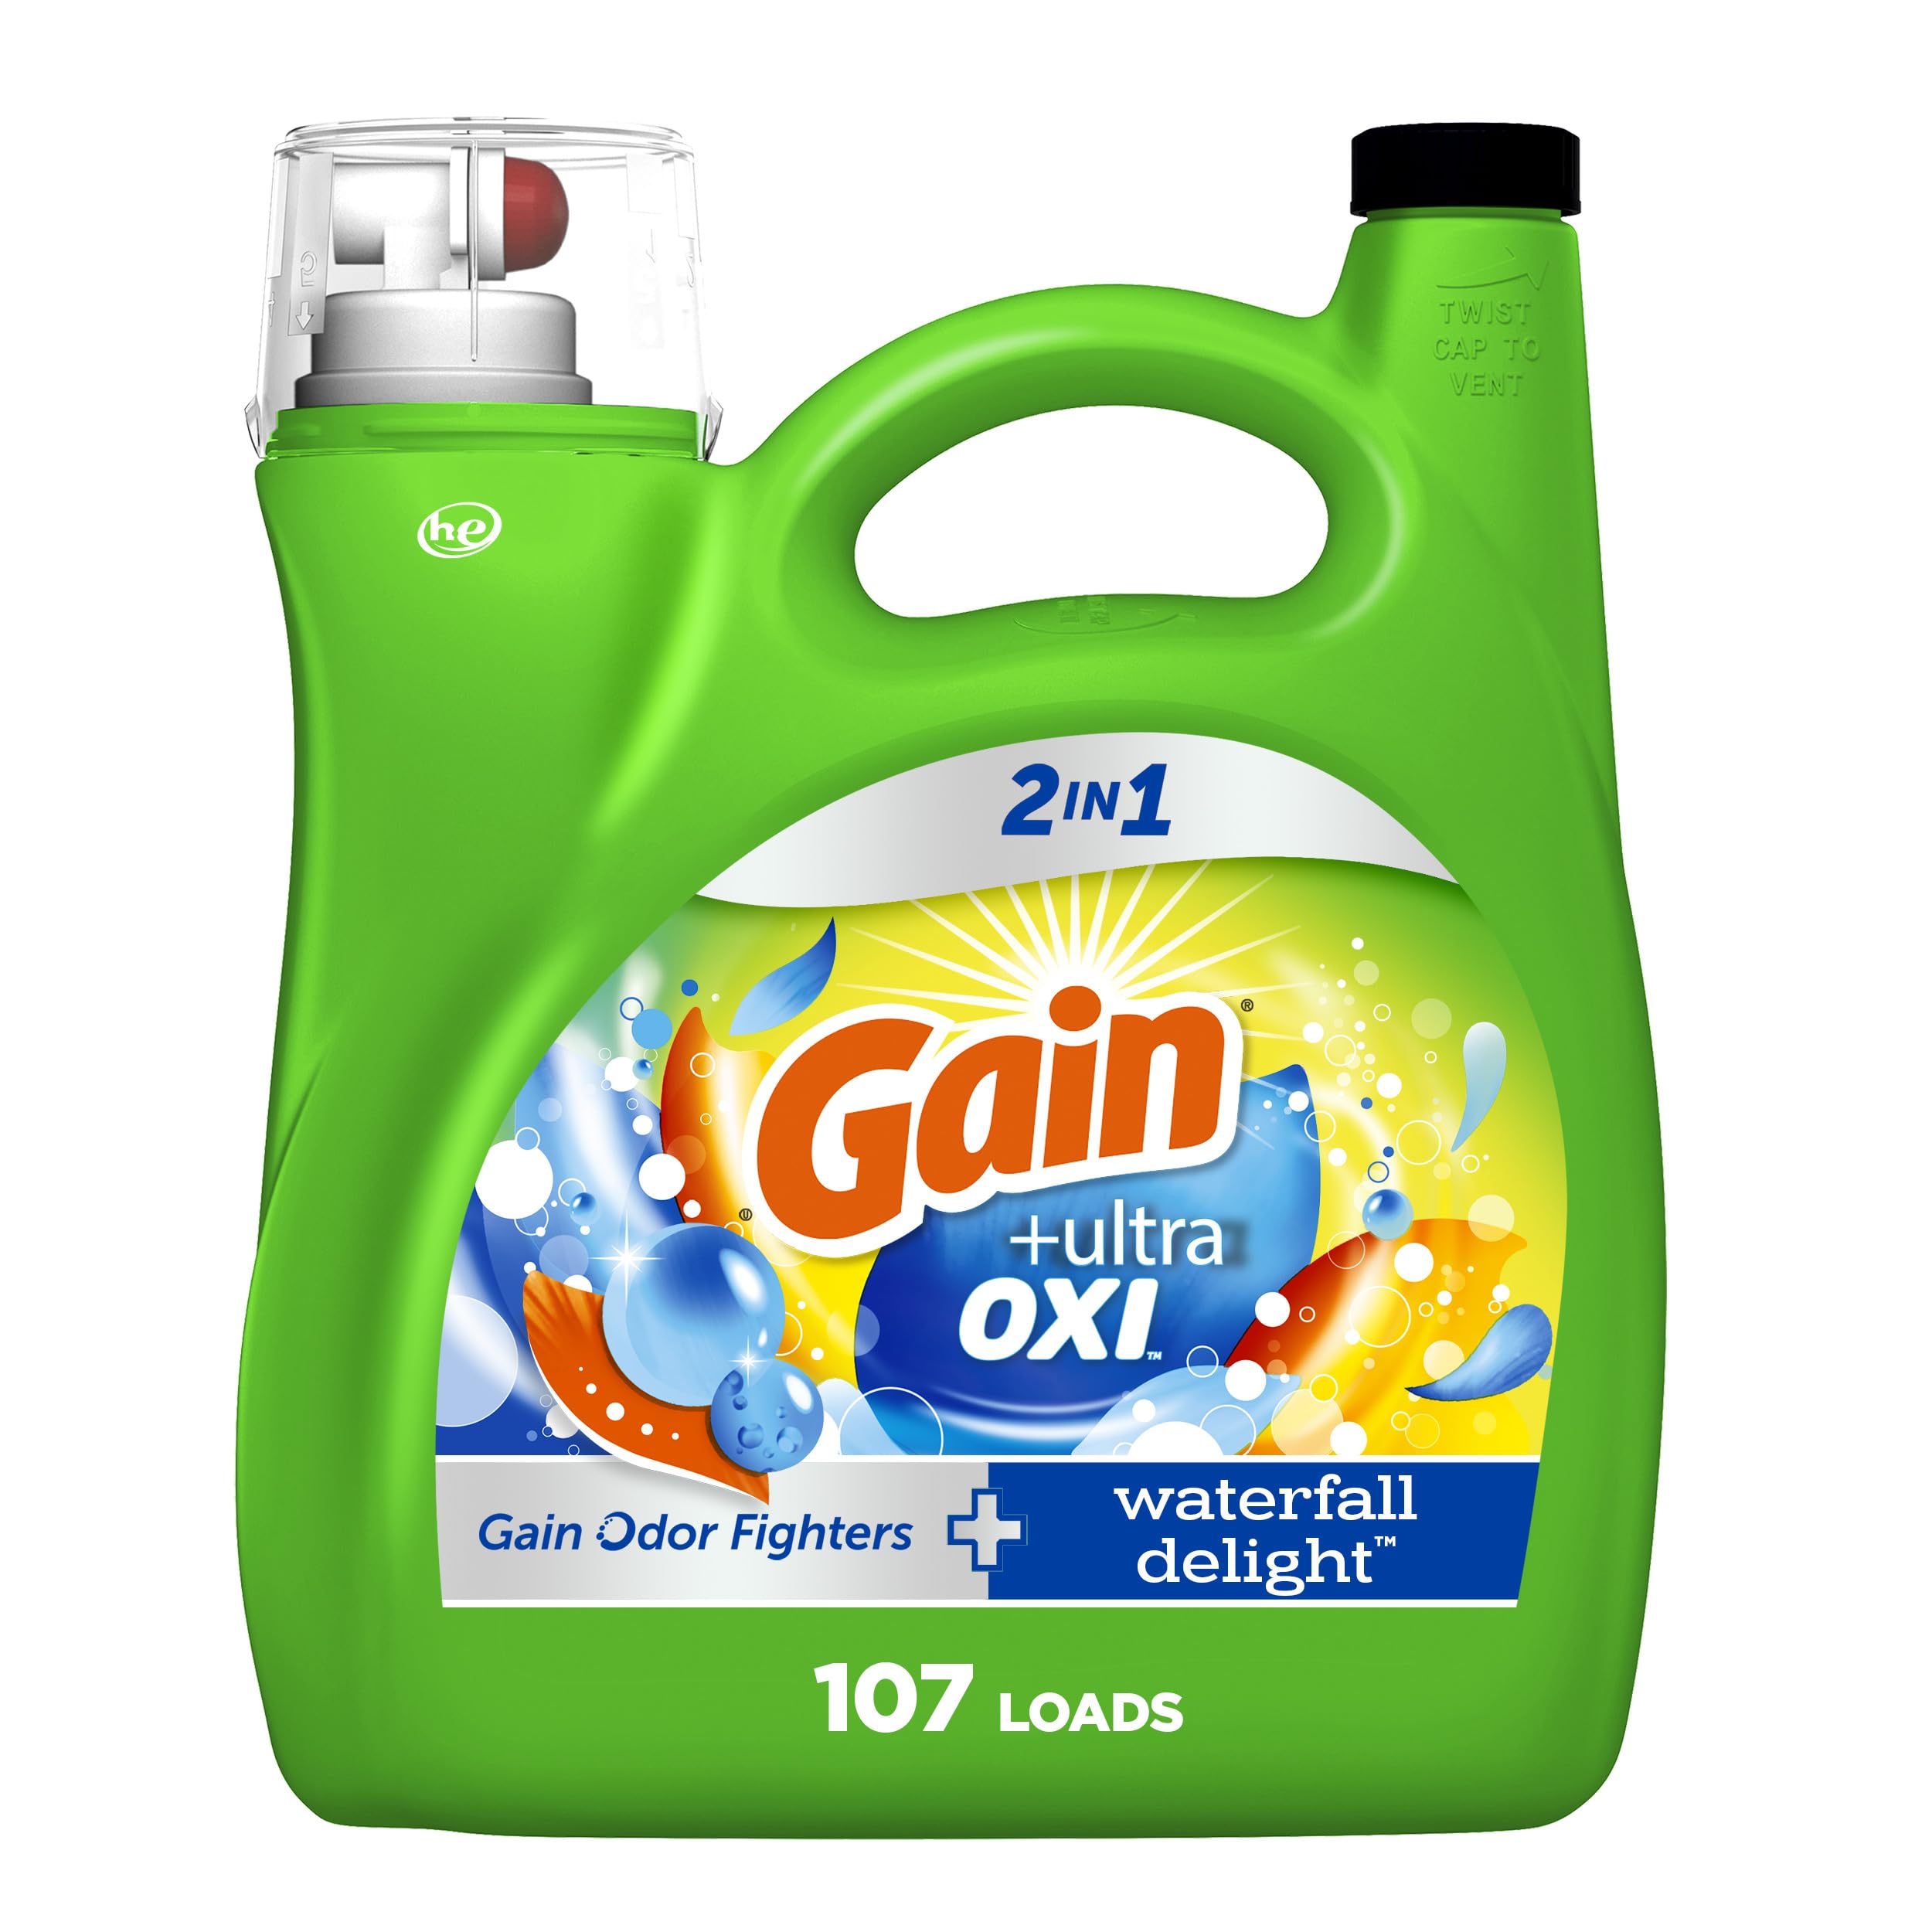 154-Oz Gain Ultra Oxi Liquid Laundry Detergent (Waterfall Delight) $15.14 + $8.50 Amazon Credit w/ S&S + Free Shipping w/ Prime or on $35+